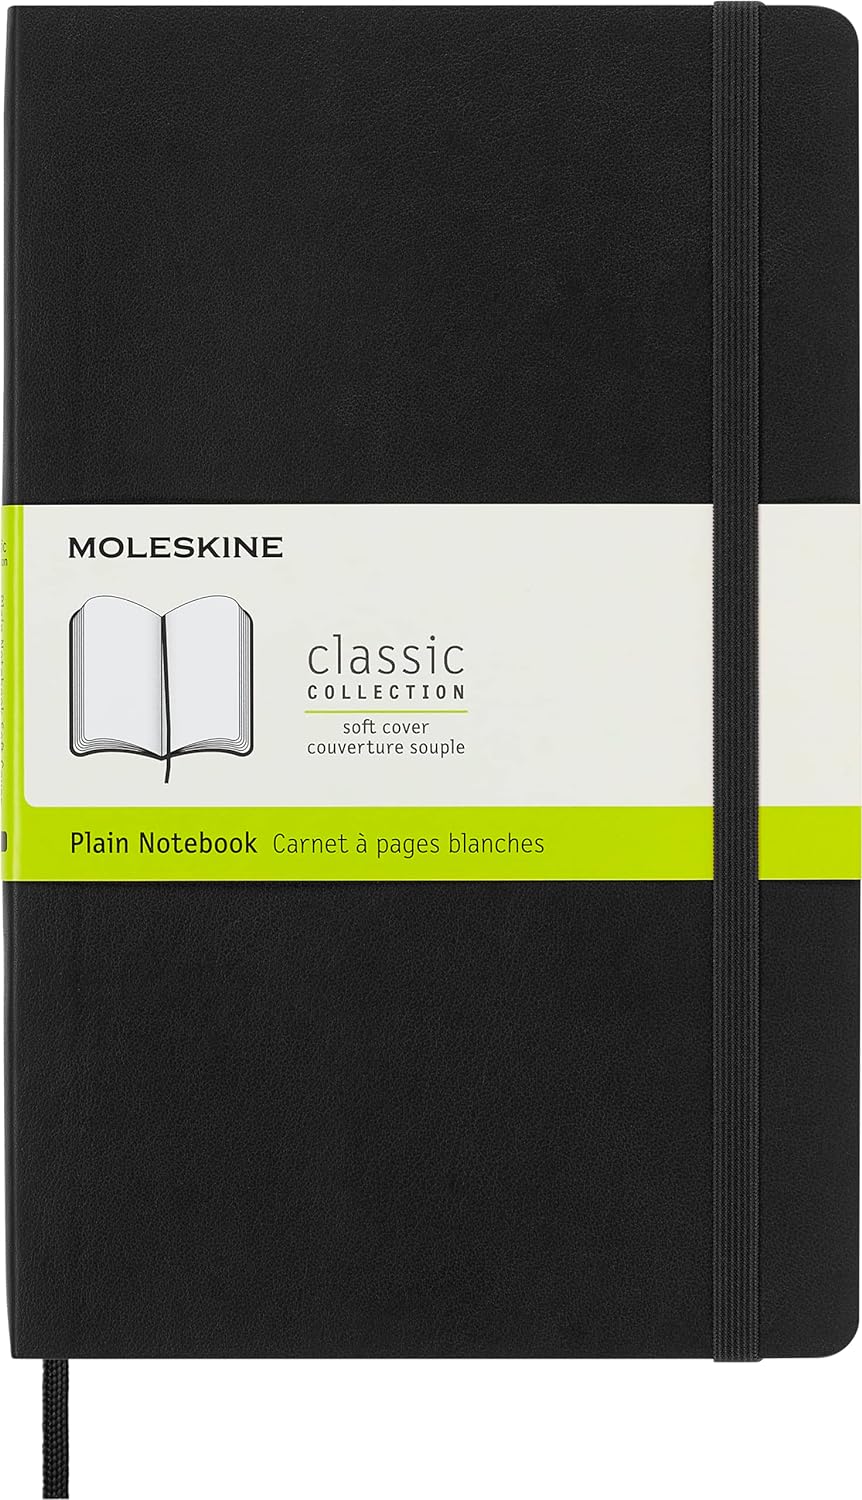 plain-blank-classic-notebook-soft-cover-large-black